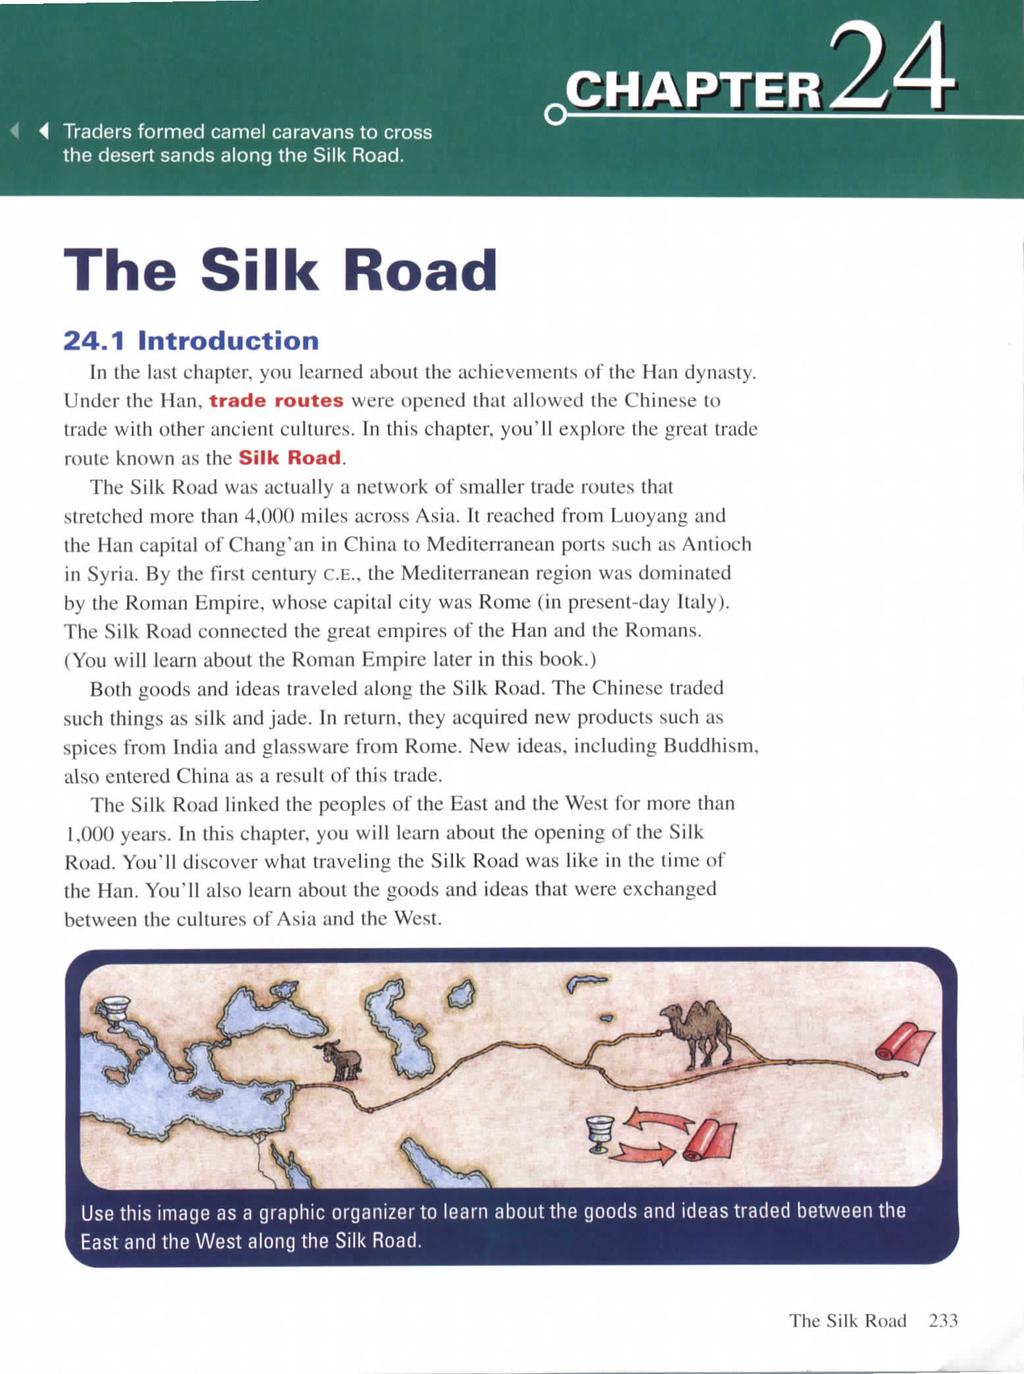 4 Traders formed camel caravans to cross the desert sands along the Silk Road. CHAPTER The Silk Road 24.1 Introduction In the last chapter, you learned about the achievements of the Han dynasty.